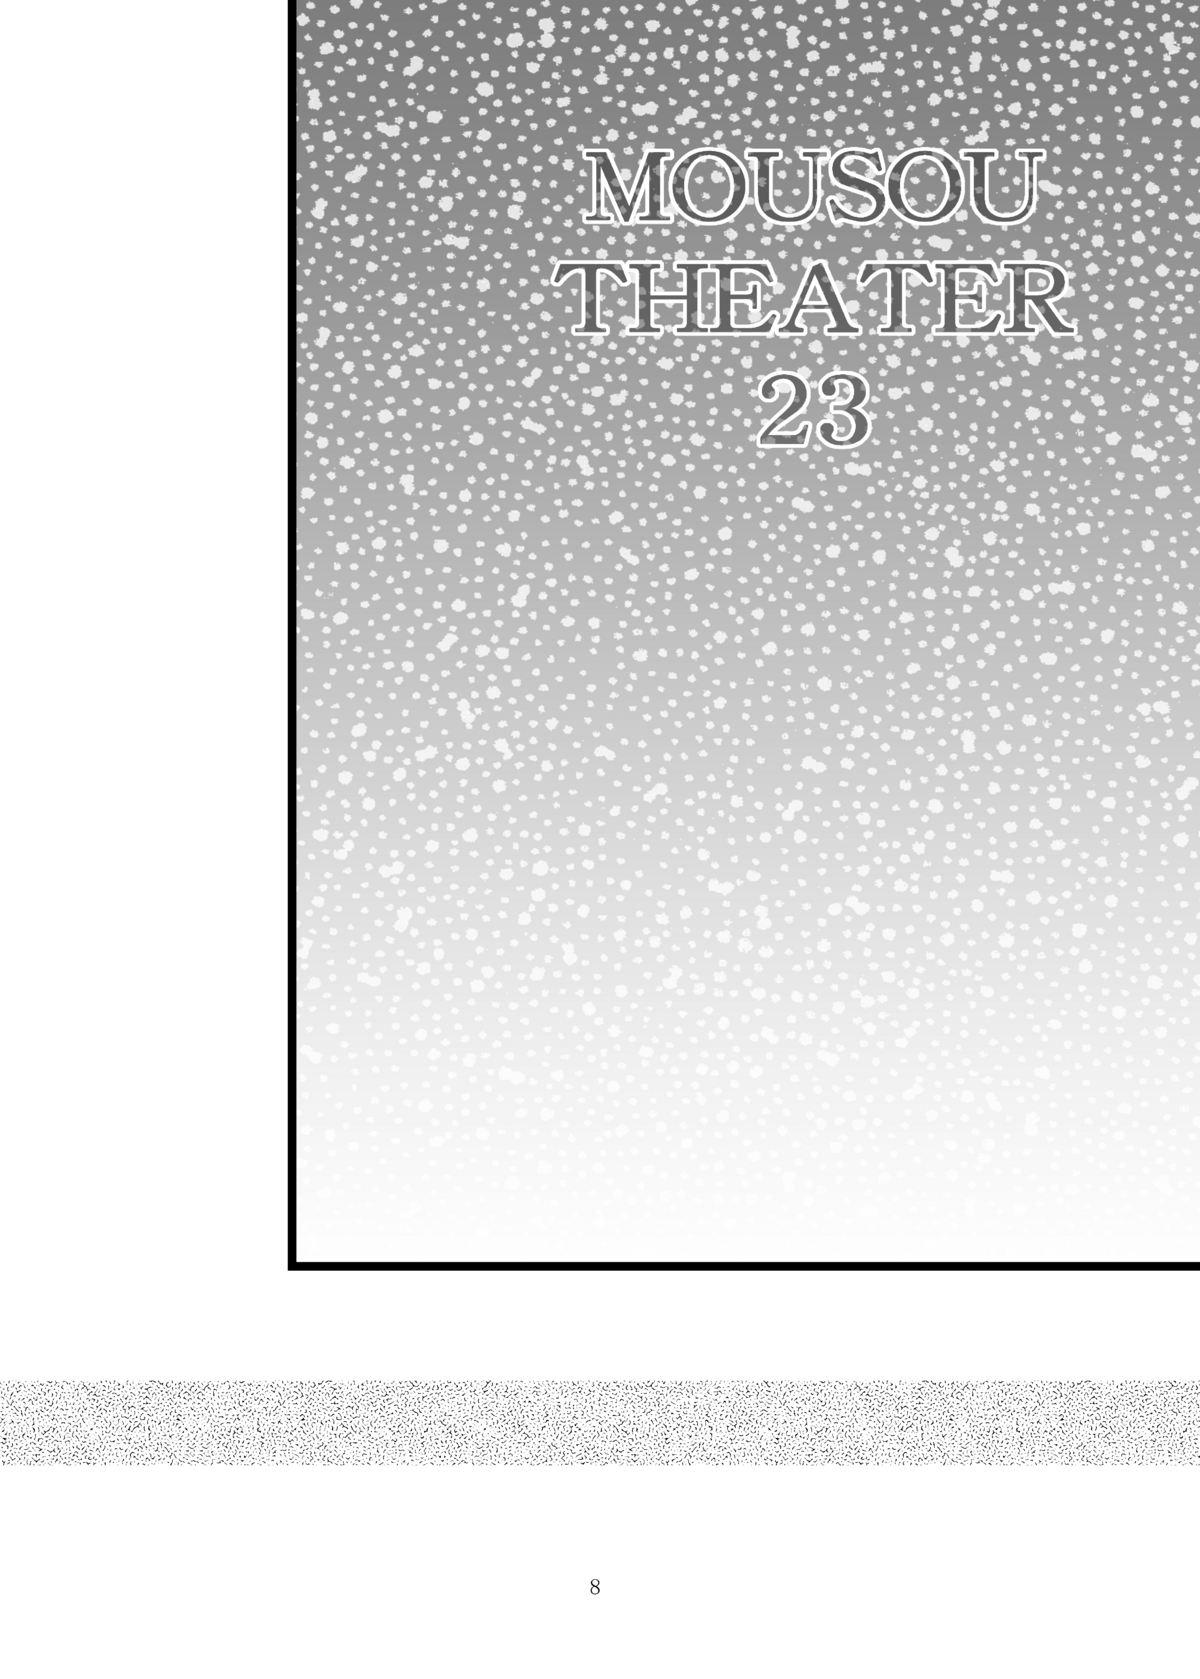 MOUSOU THEATER 23 7